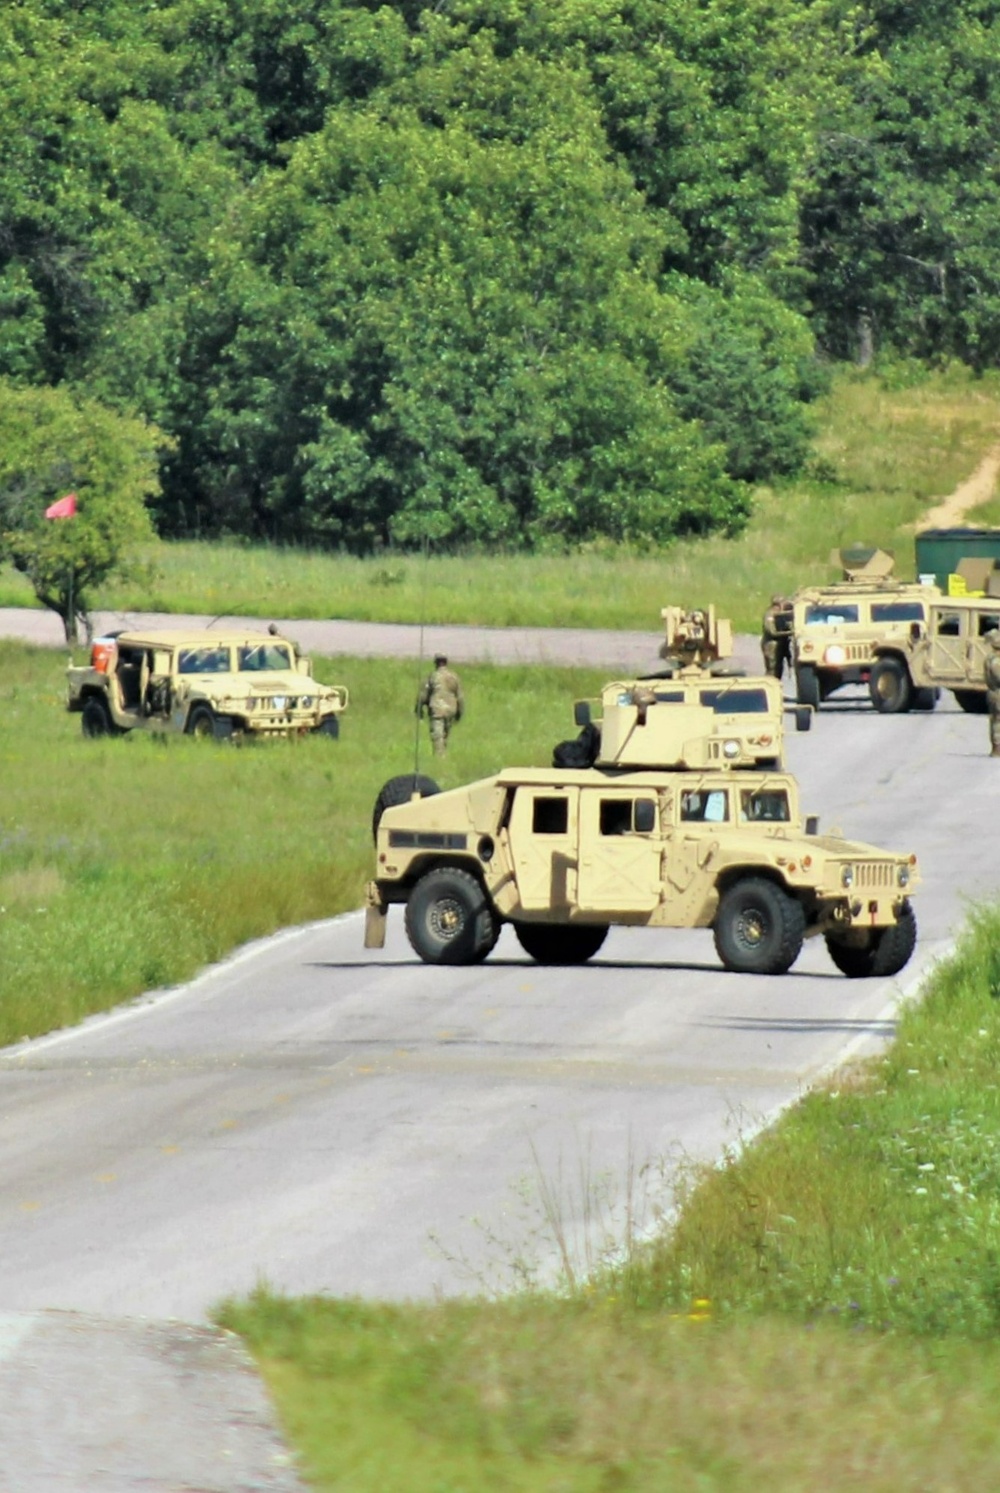 Fort McCoy 2023 in Review: Second half of year included extensive troop training, more new construction, special eventsFort McCoy 2023 in Review: Second half of year included extensive troop training, more new construction, special events